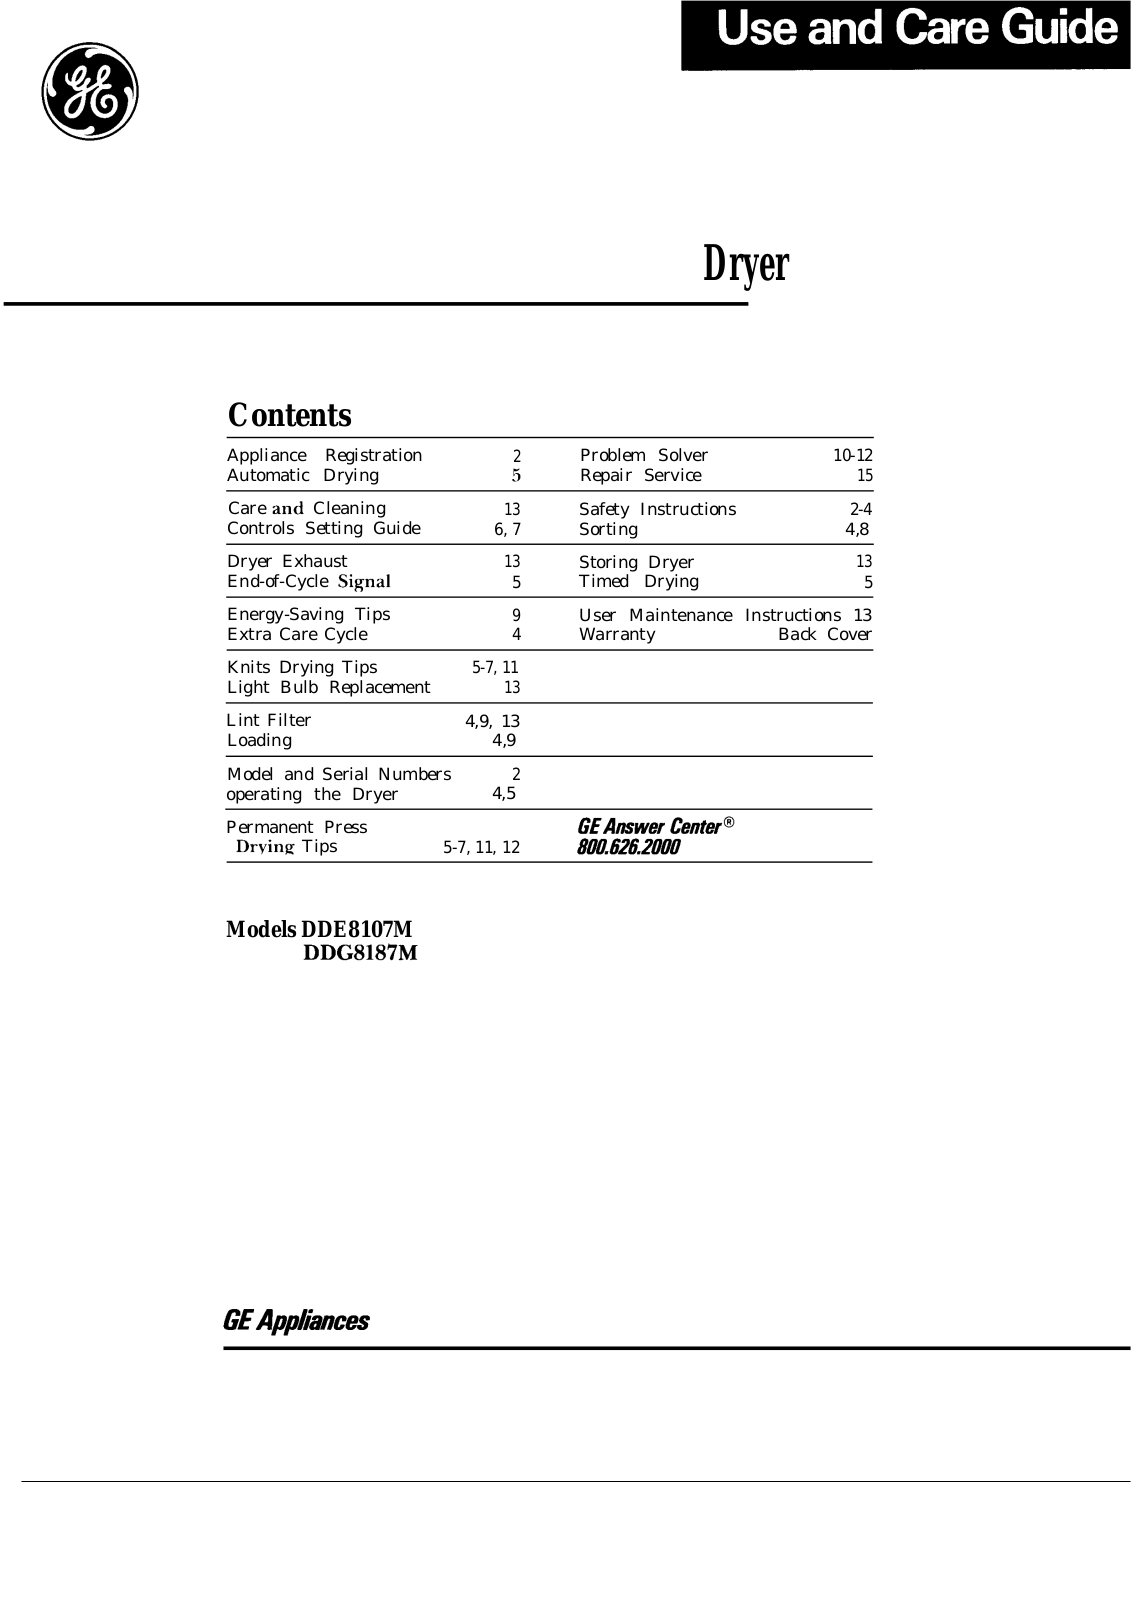 GE DDE8107M, DDG8187M Use and Care Manual